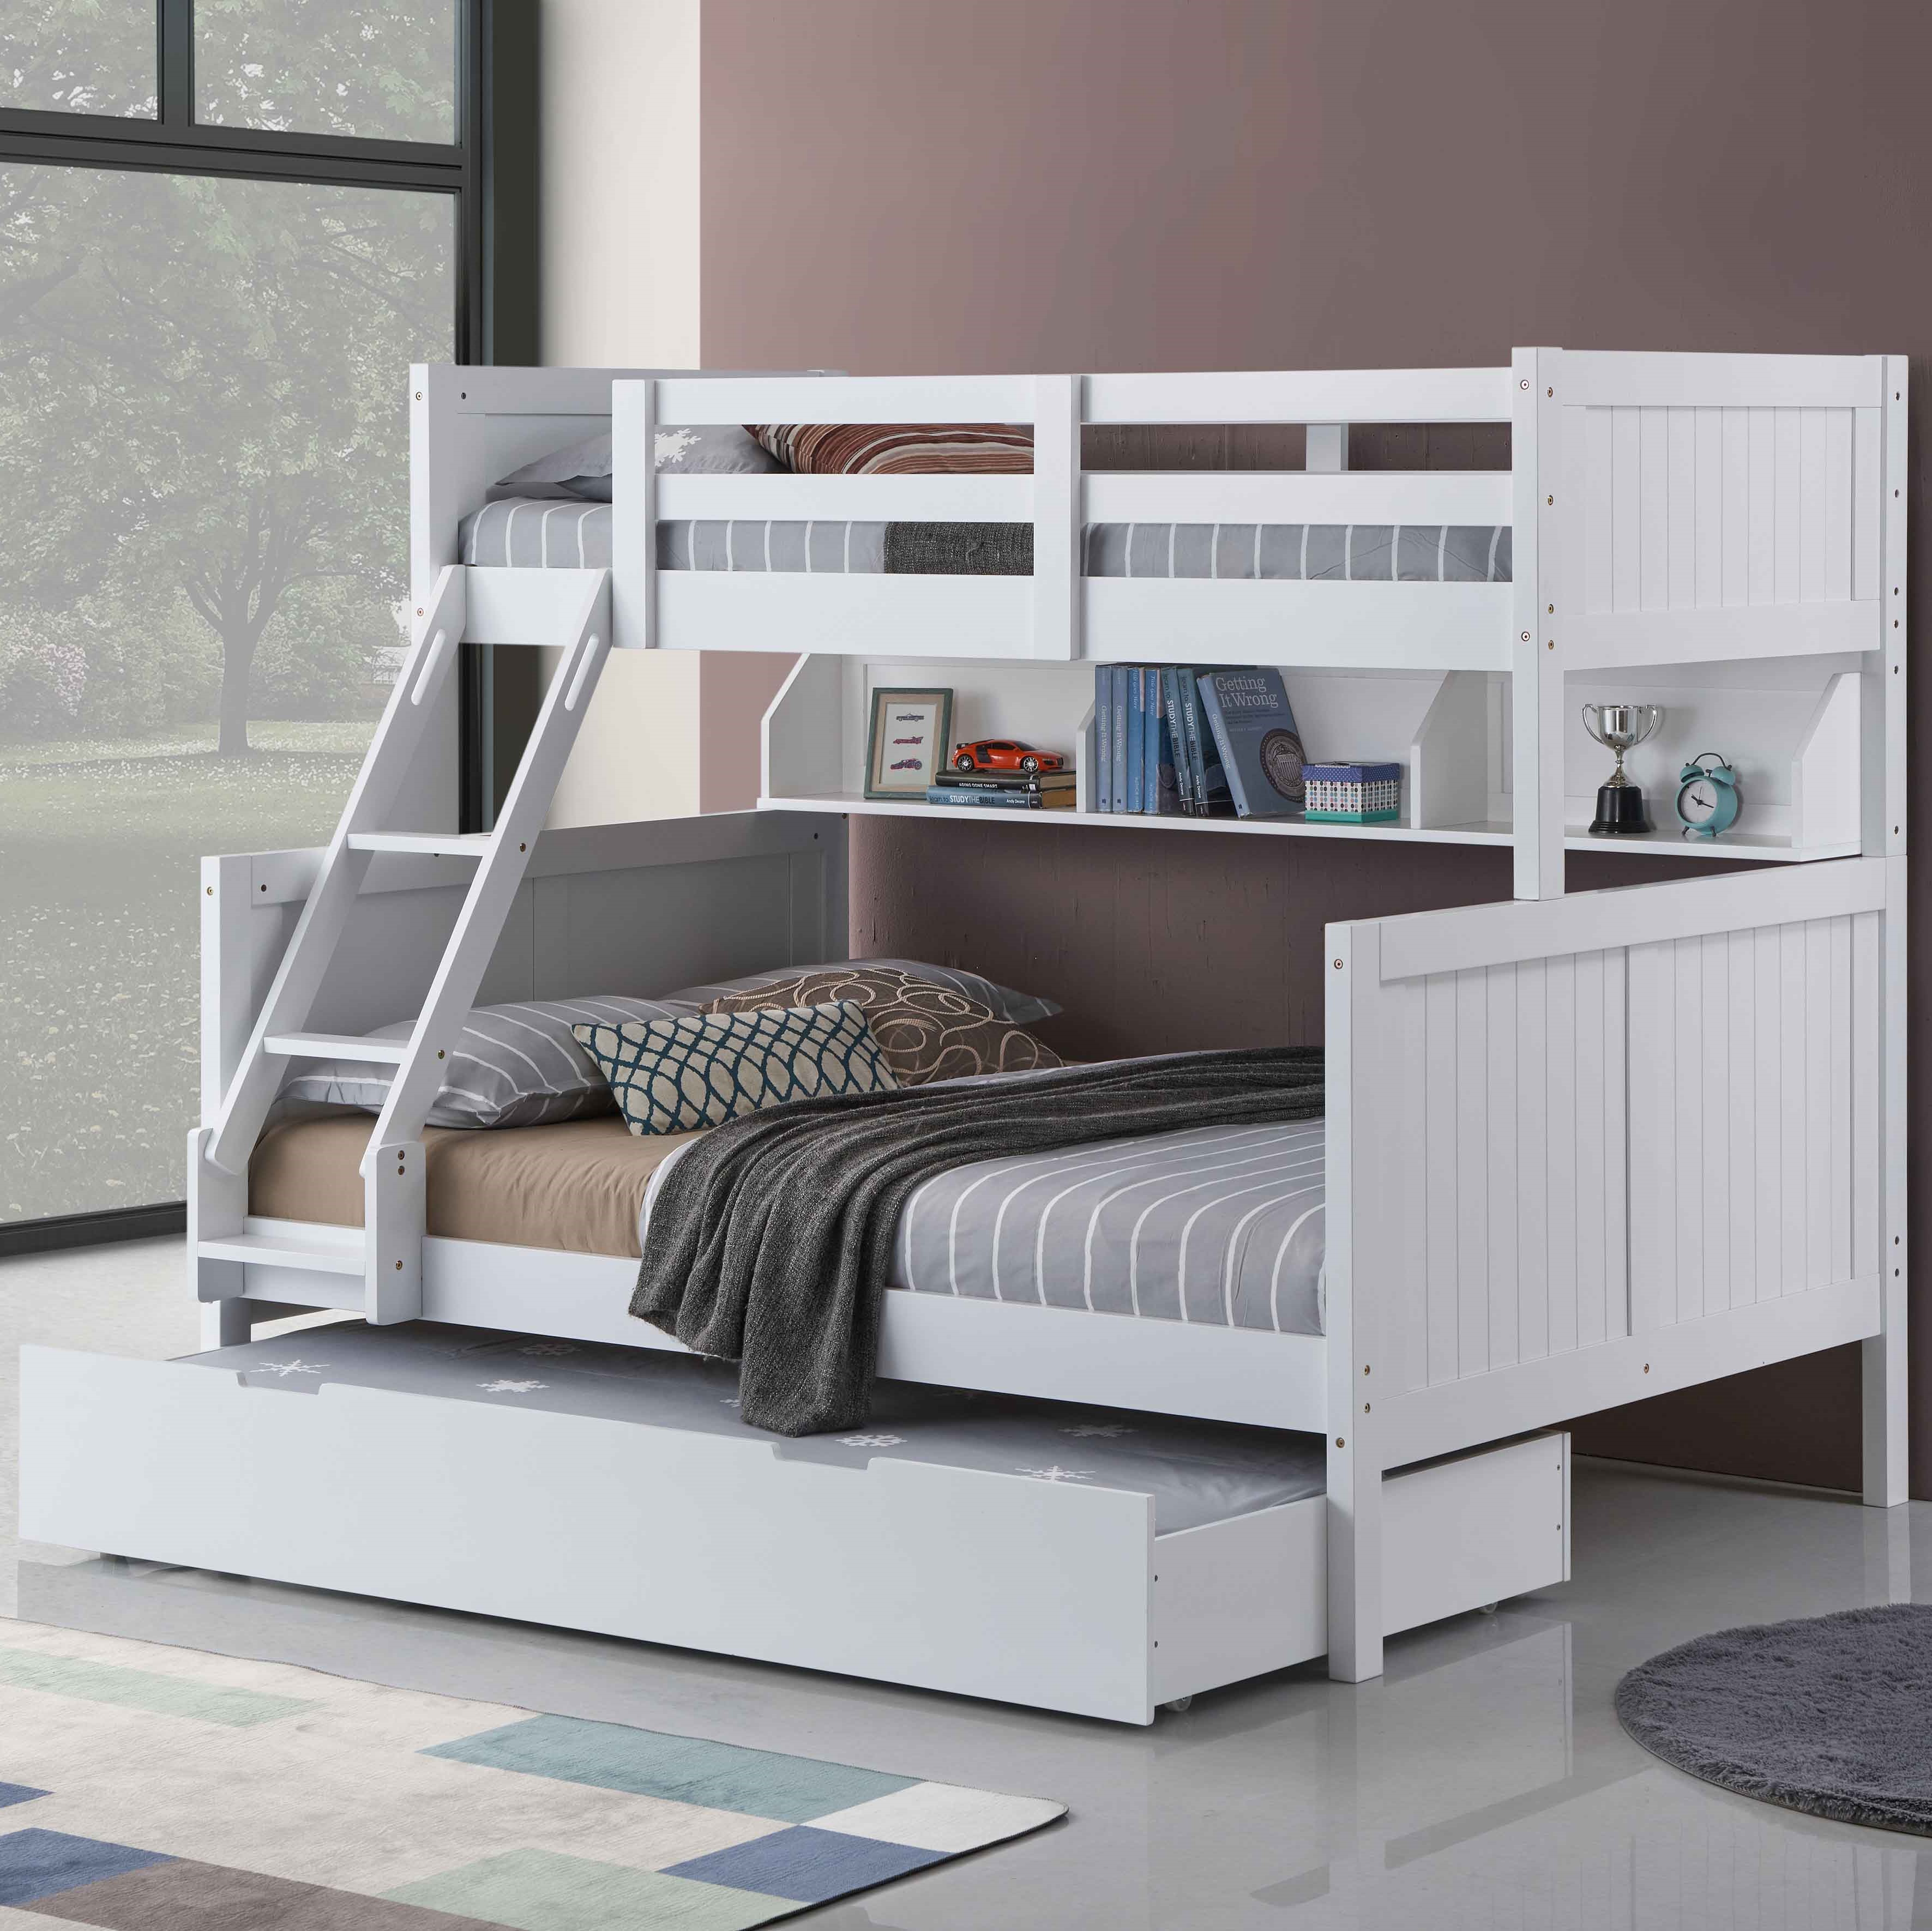 Double Bunk Bed Storage Trundle, Bunk Bed Shelves Storage